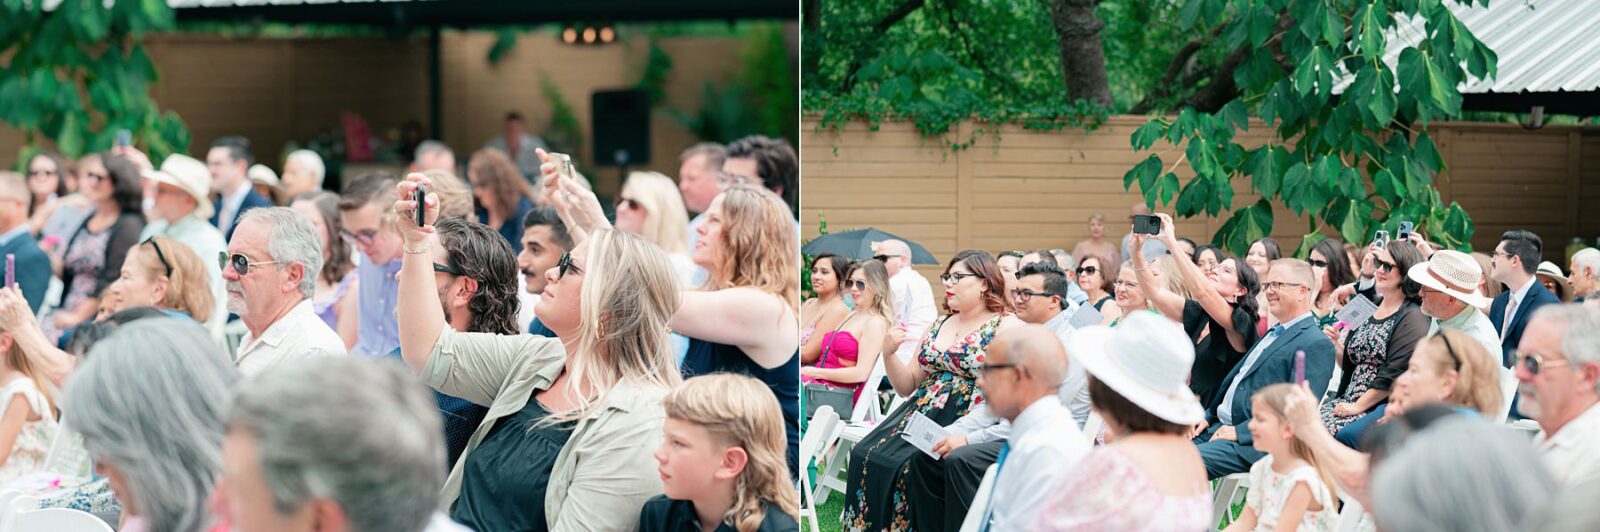 guests allowed to take cell phones out for photos at wedding ceremony